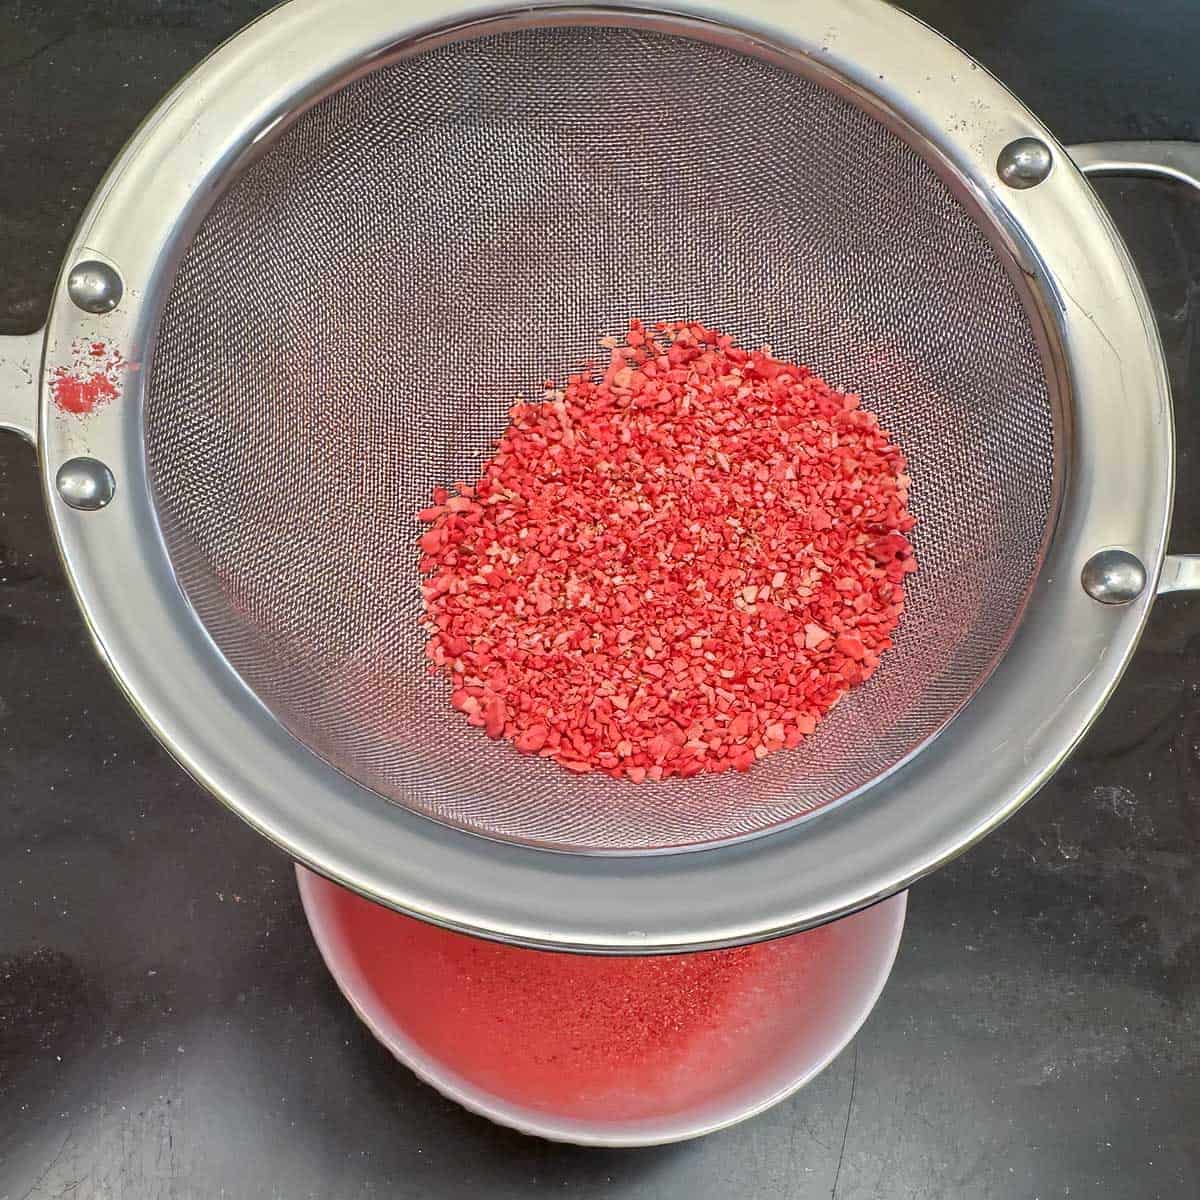 Sifting large pieces of freeze-dried strawberries after running it through a food processor.